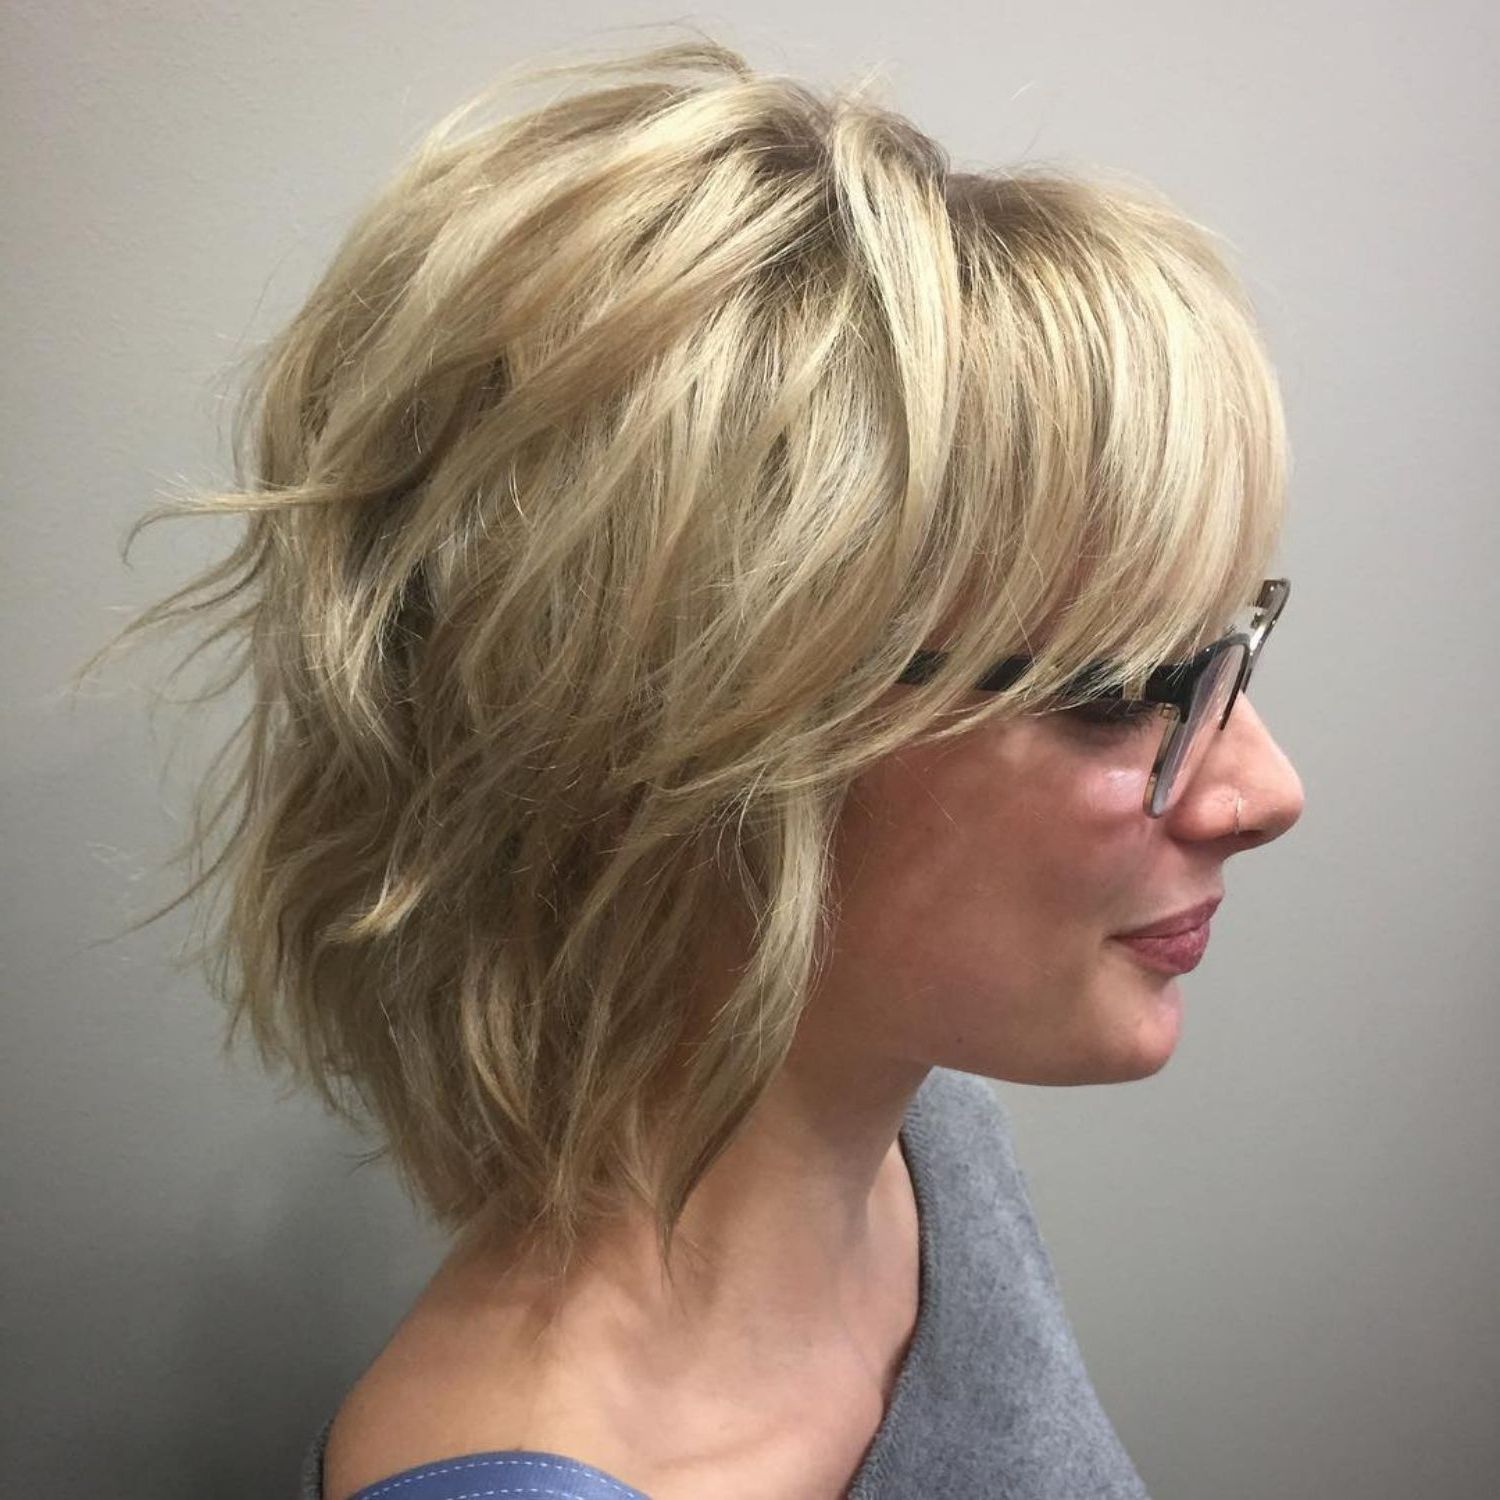 60 Most Universal Modern Shag Haircut Solutions In 2019 Throughout Shaggy Blonde Bob Hairstyles With Bangs (View 2 of 20)